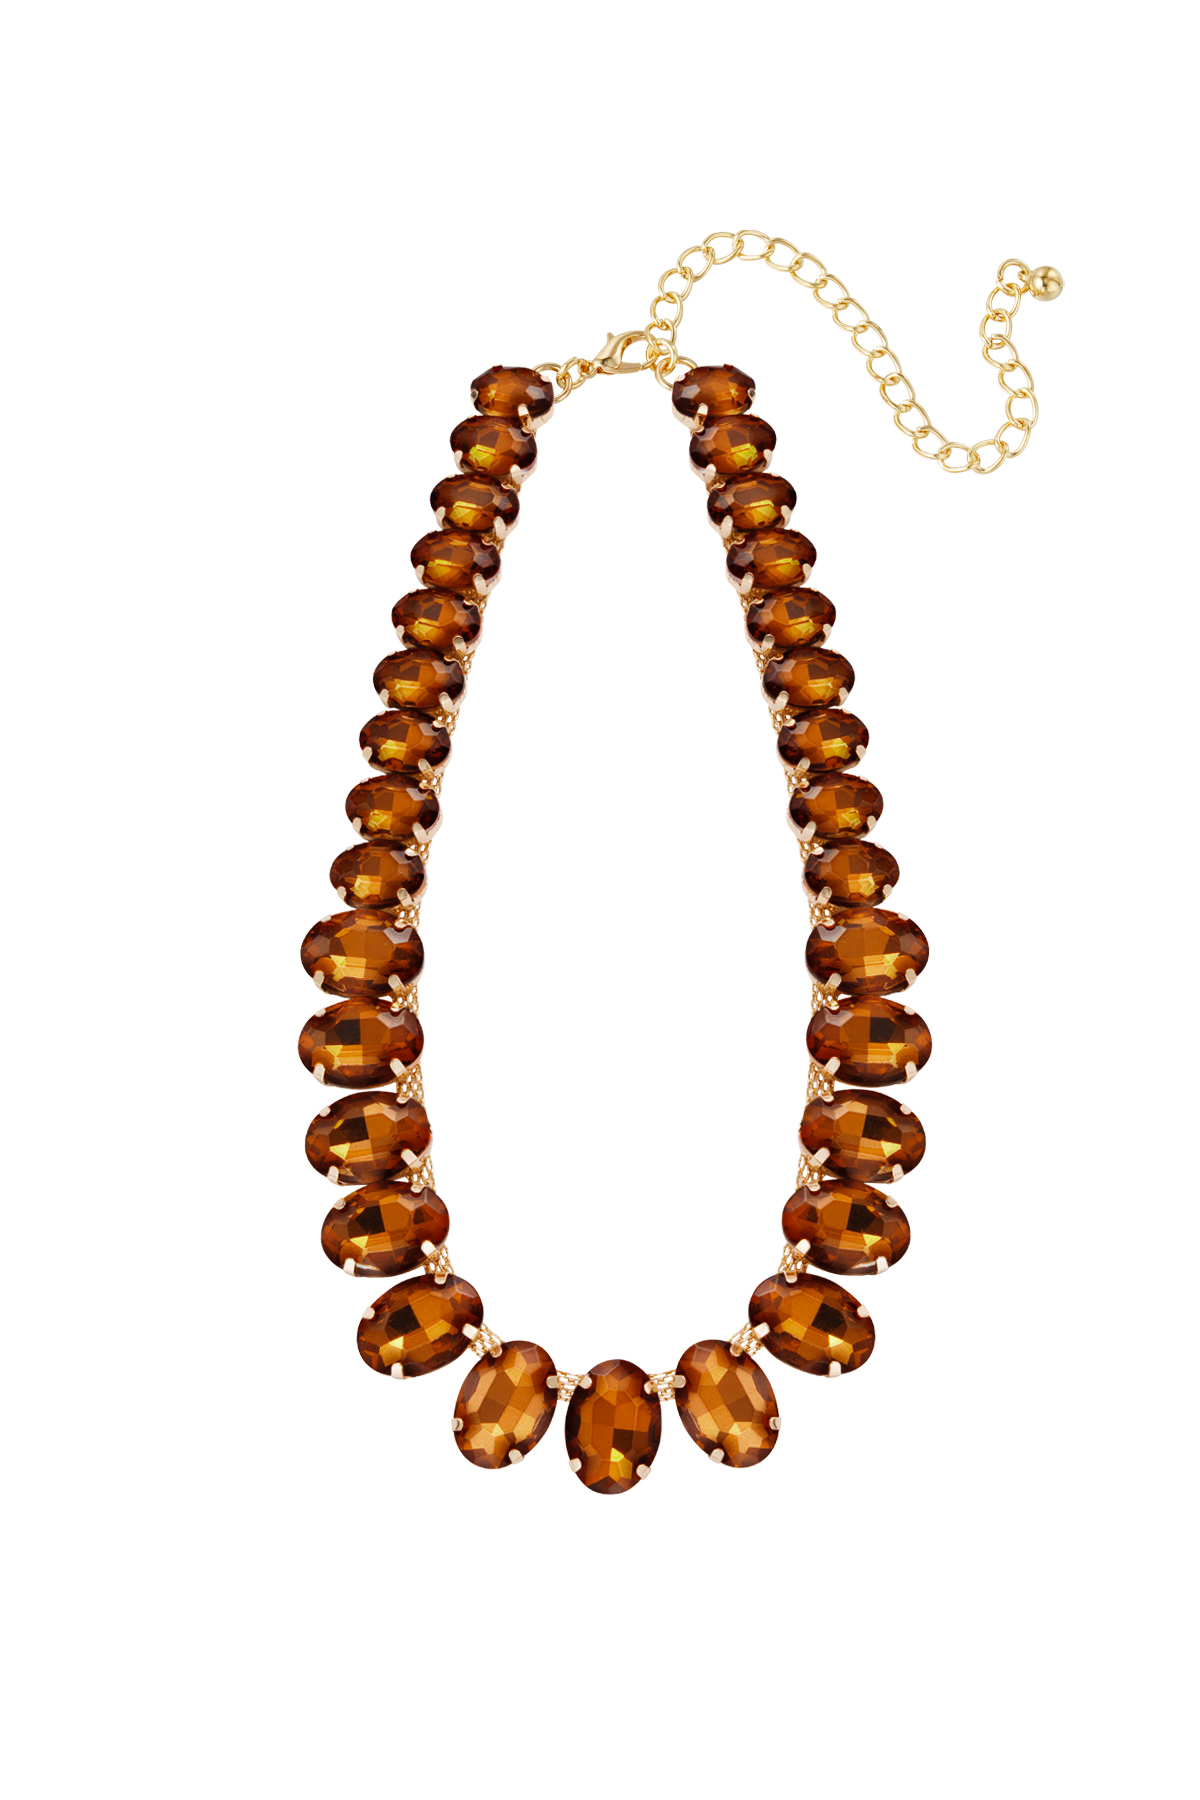 Necklace large oval beads - brown